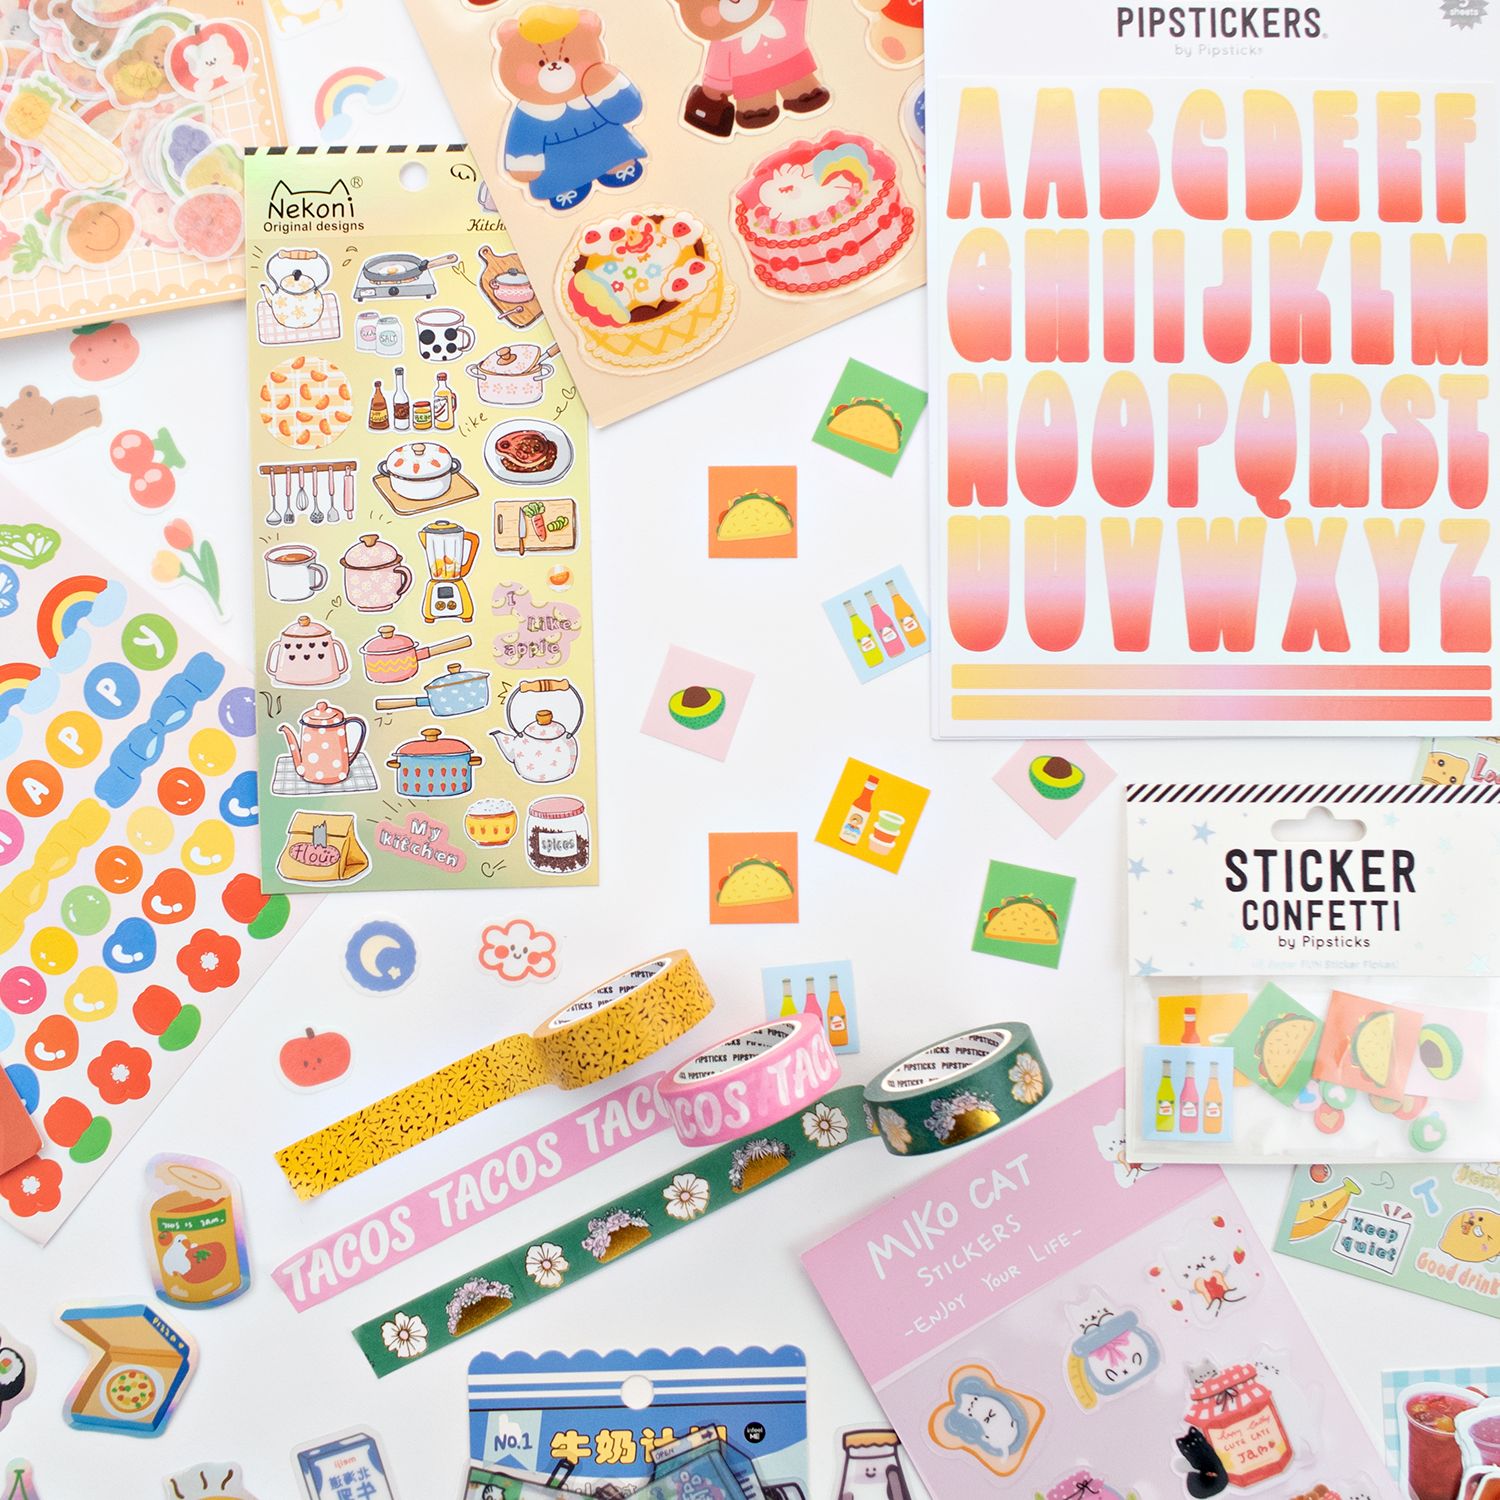 Cute Enough To Eat! Stationery Box